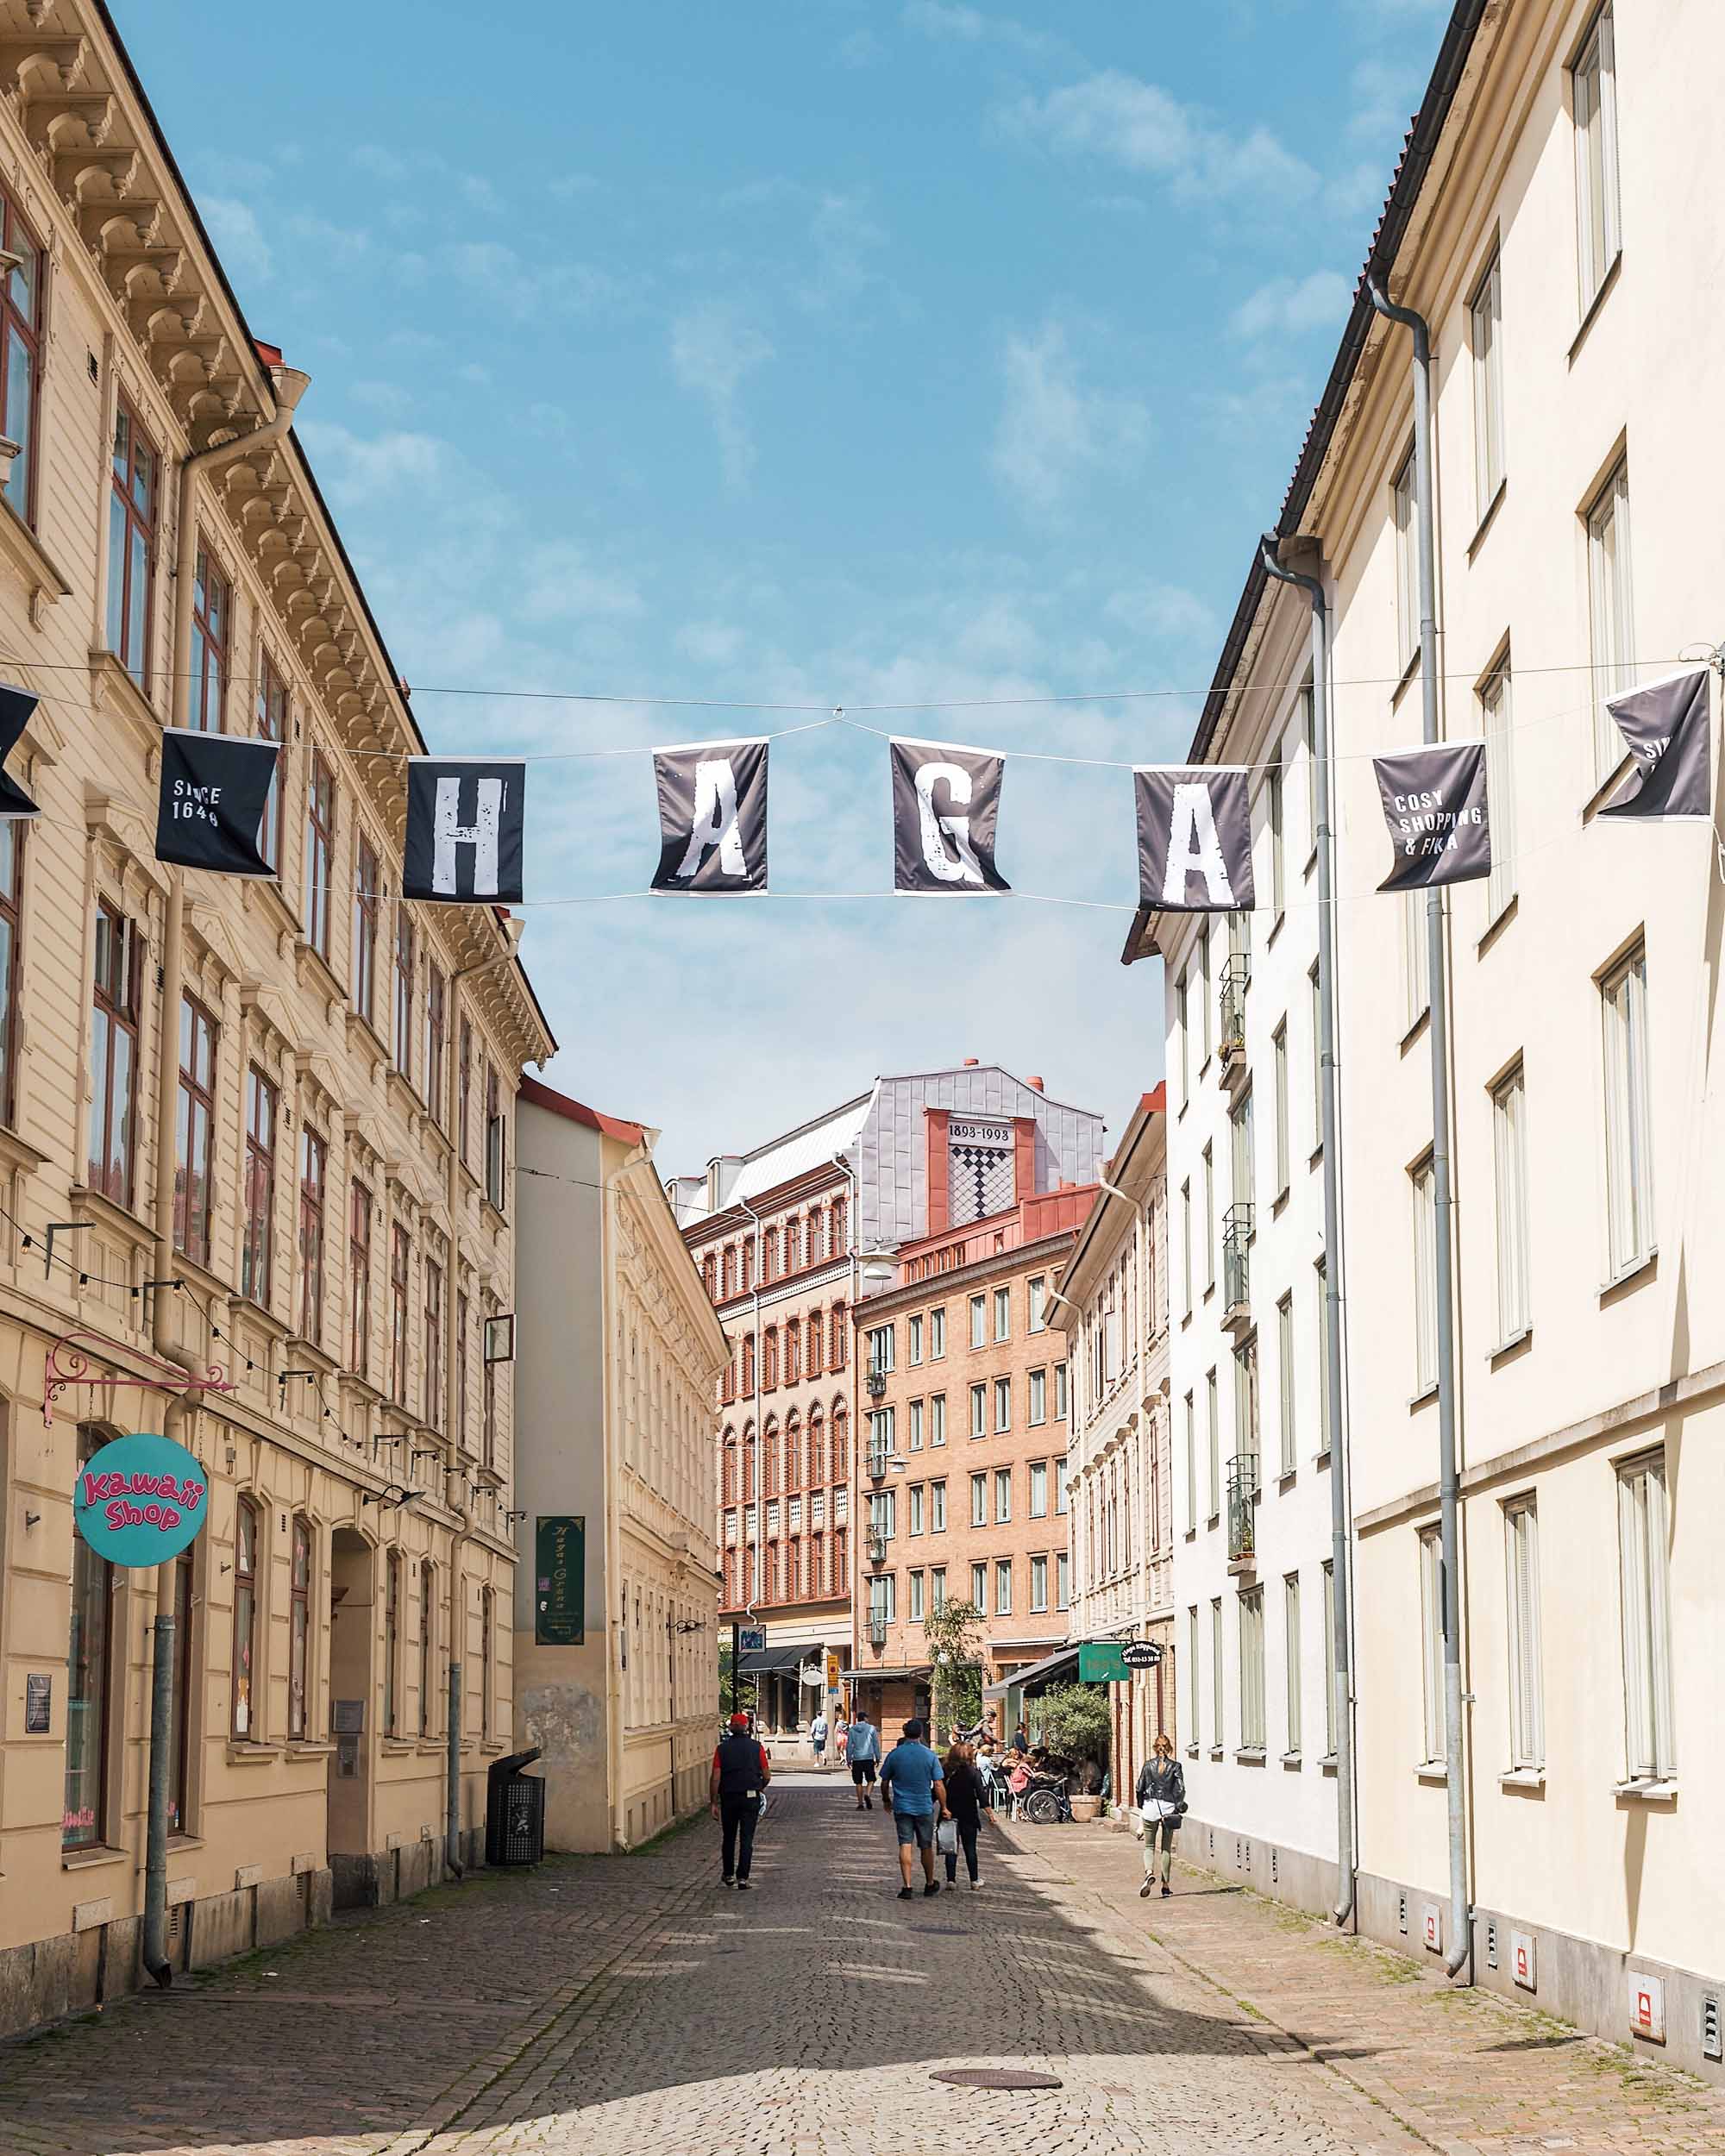 Haga is one of the oldest neighborhoods in Gothenburg, full of beautiful shops, cafes, and cobblestone streets